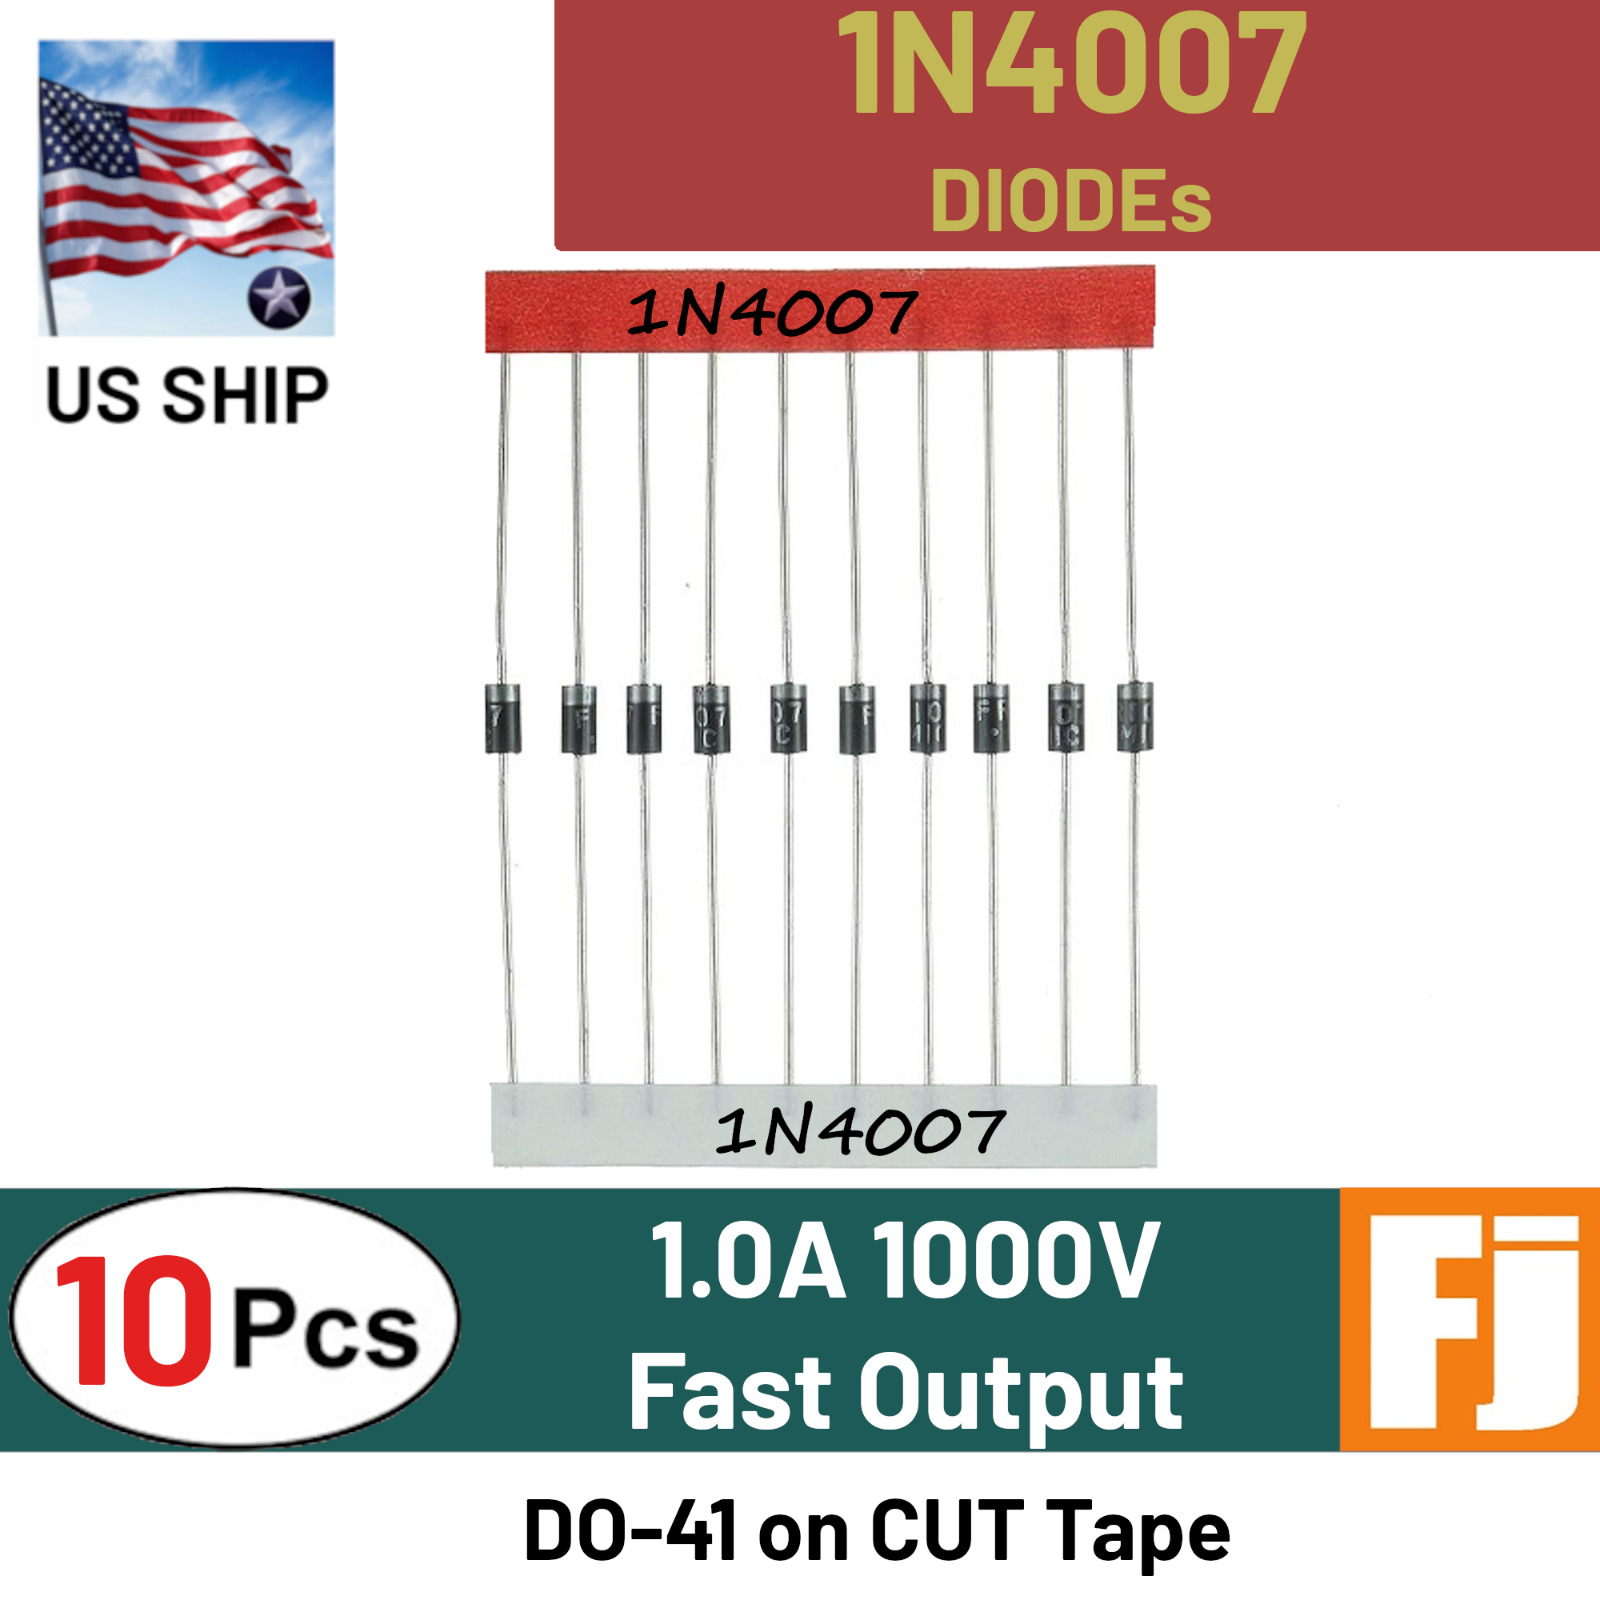 1N4007 Diode (10 Pcs) 1A 1000V Rectifier Diode DO-41 Fast IN4007 | US SHIP